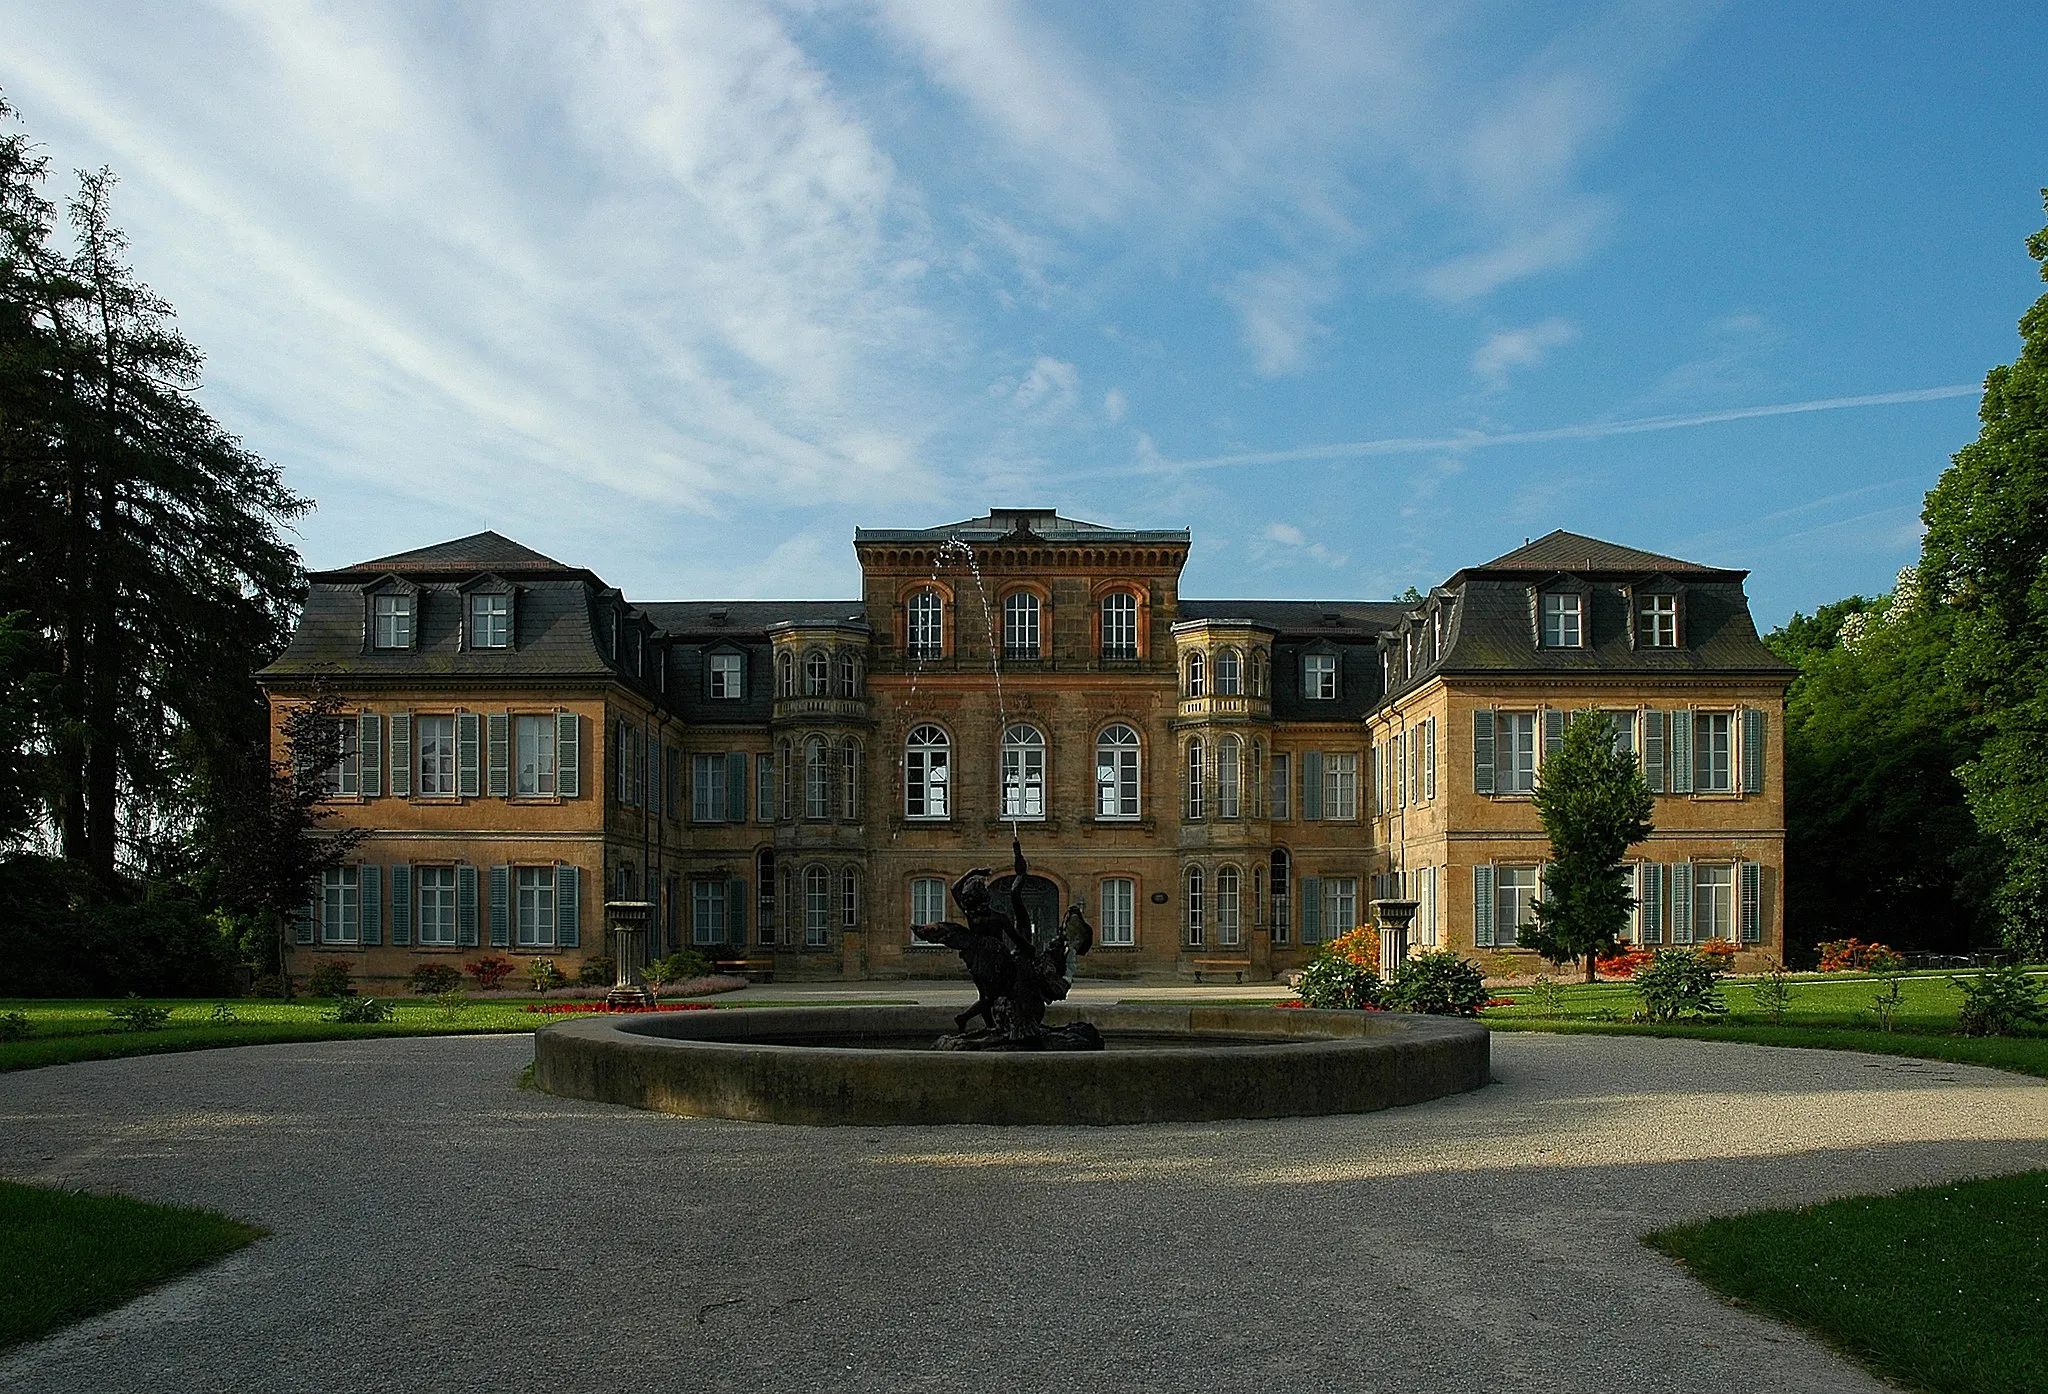 Photo showing: North facade of palace Fantaisie in Eckersdorf, district Bayreuth, Germany